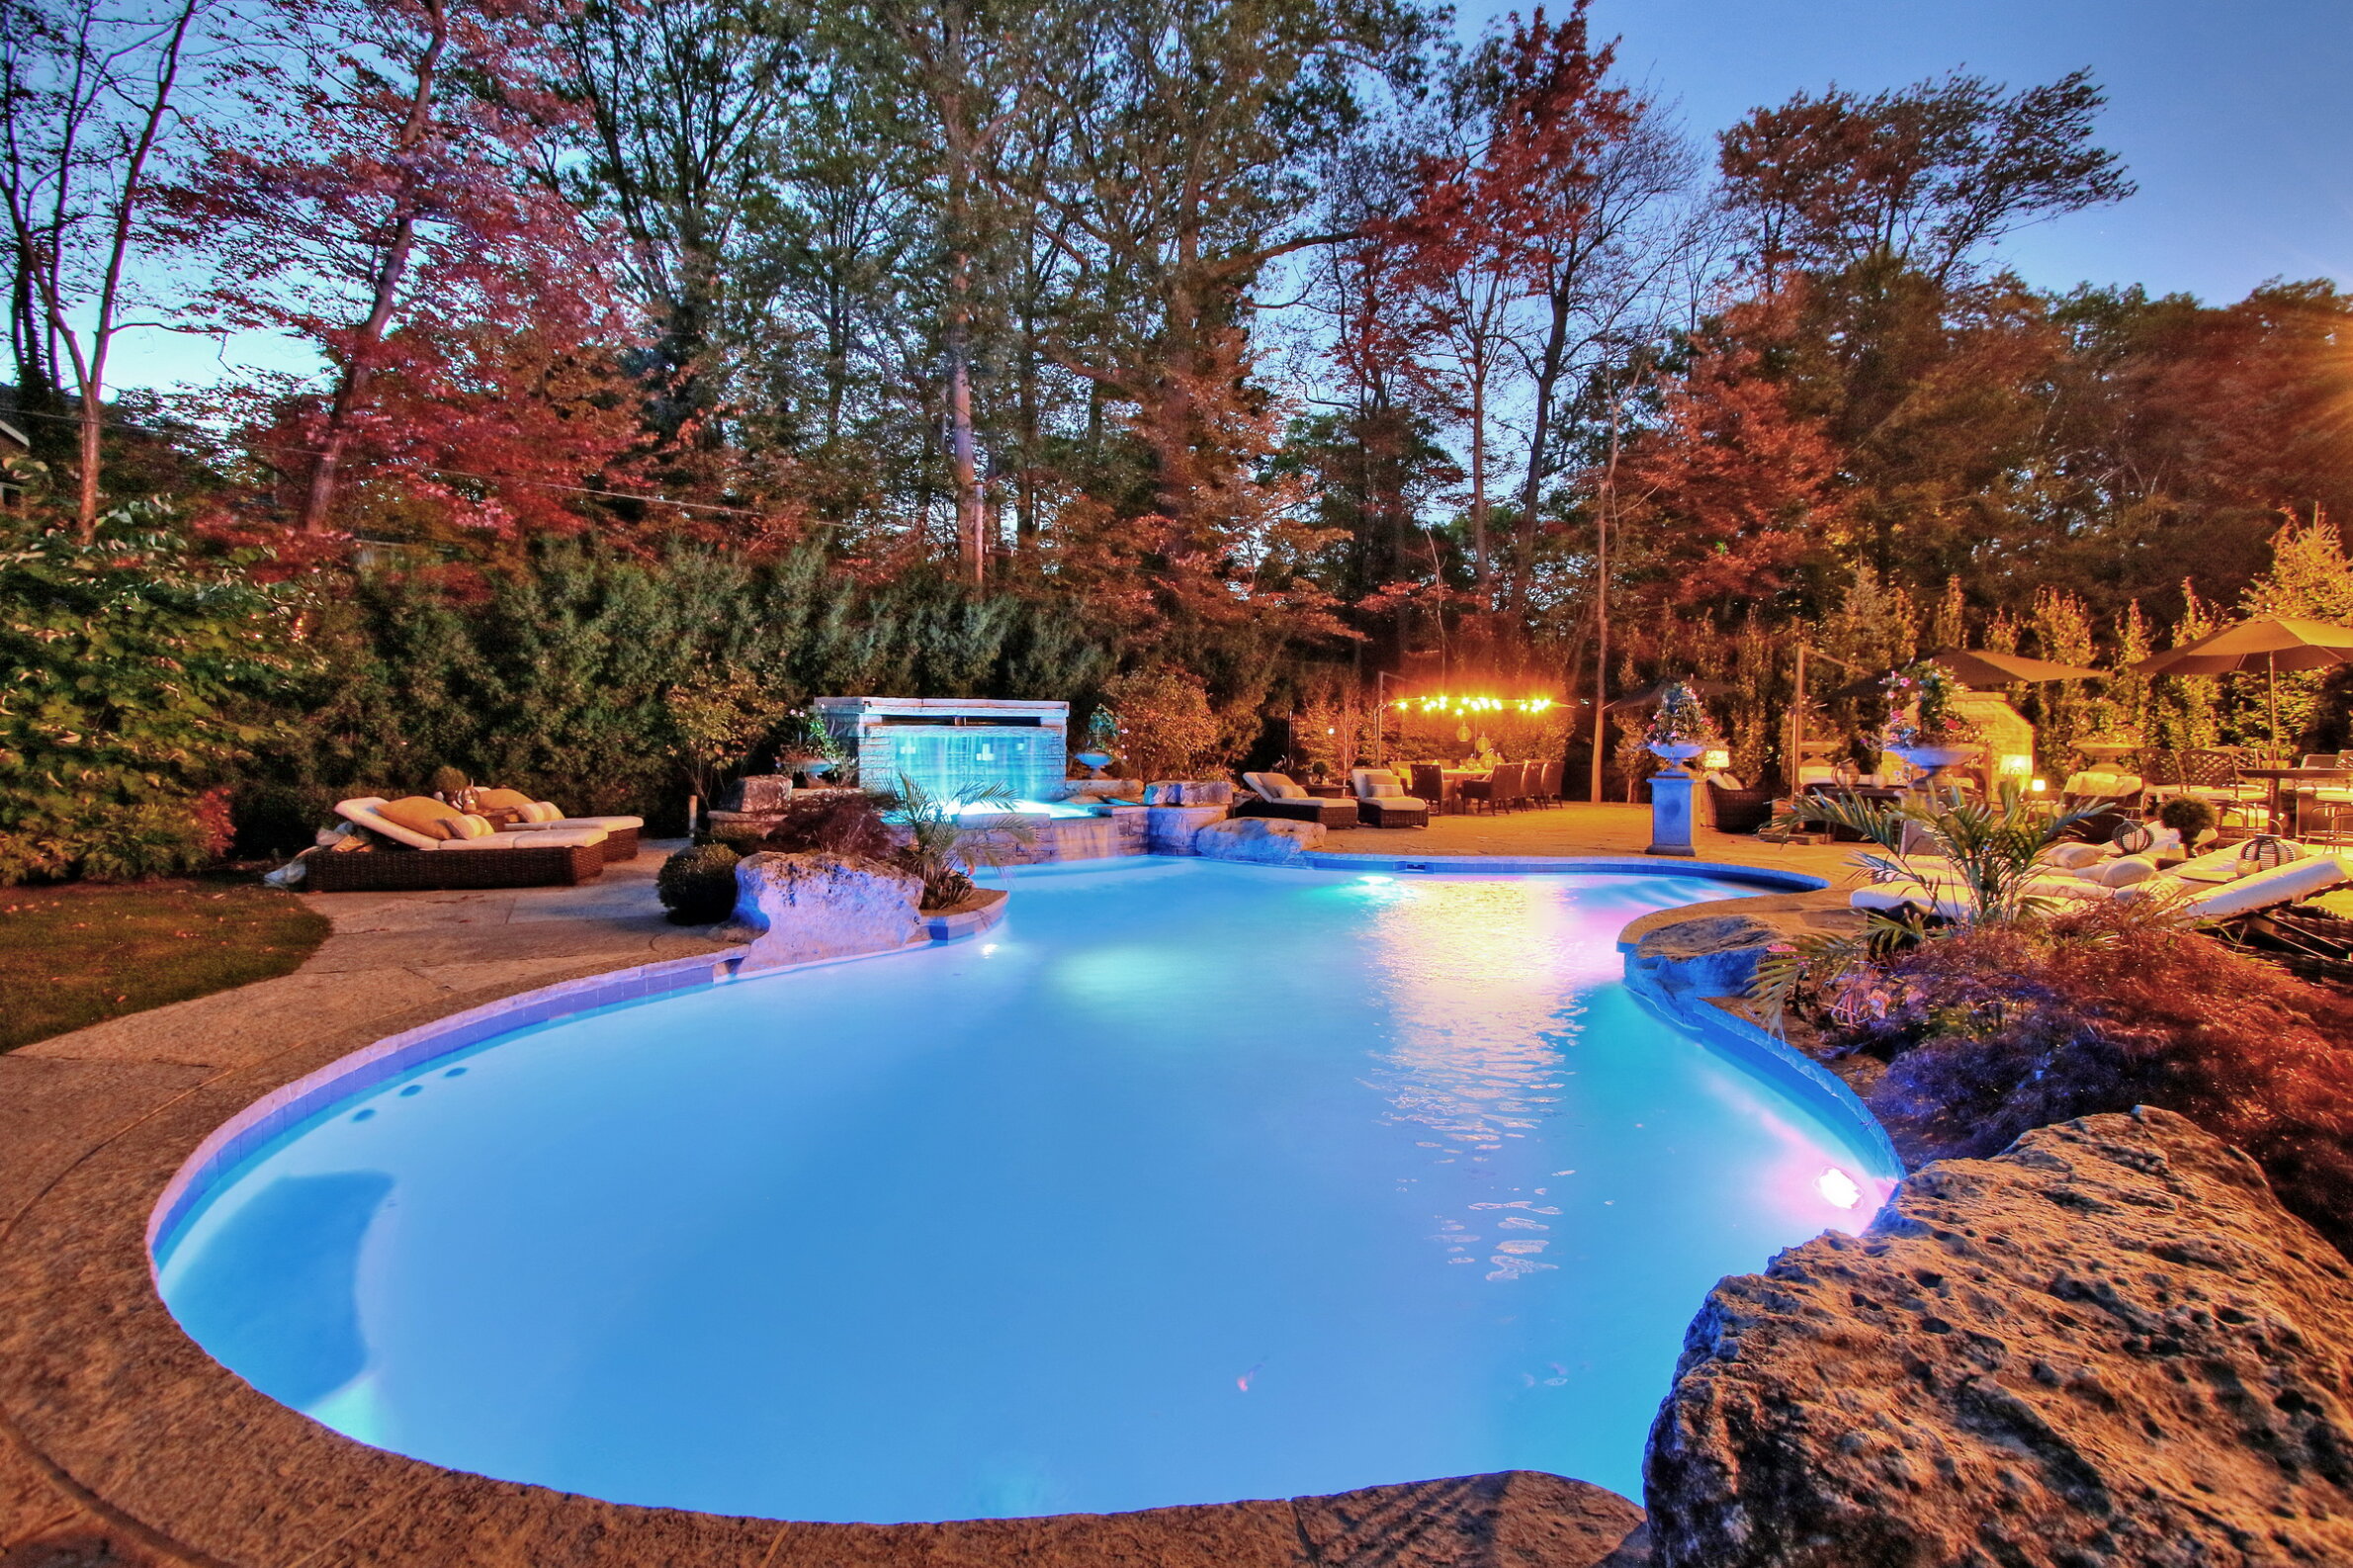 An outdoor swimming pool with blue lighting at dusk, surrounded by autumn trees, cozy lounge areas, and a water feature in a backyard setting.